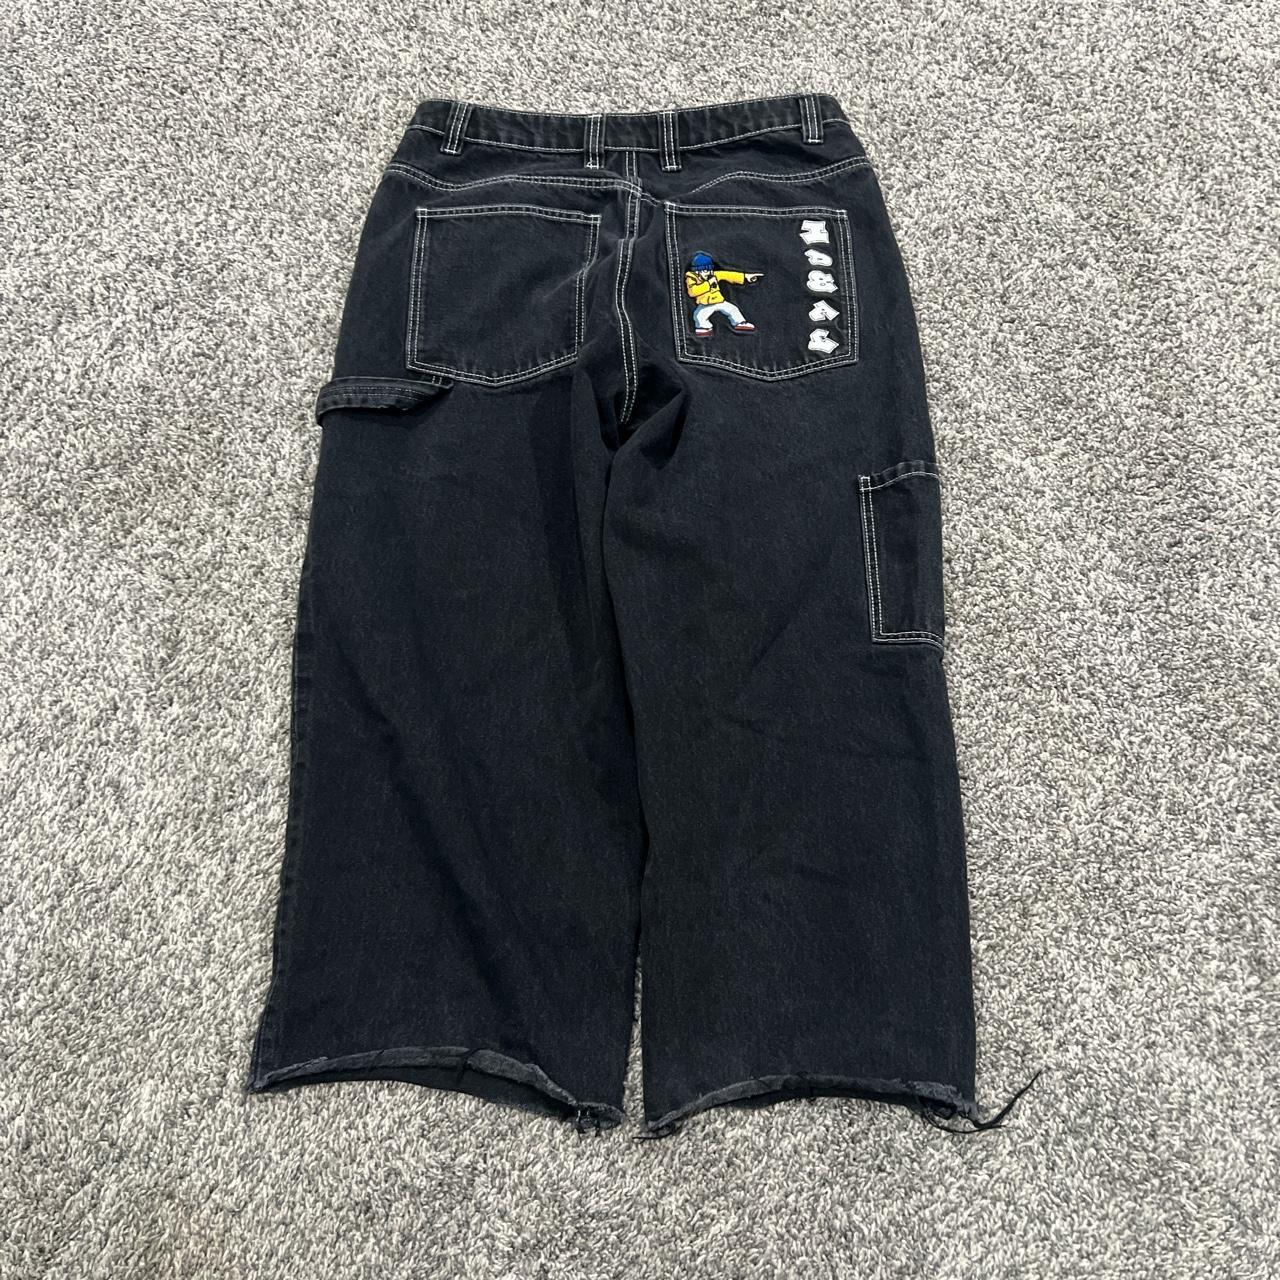 TAGGED JNCO FOR EXPOSURE idealism baggy jeans jnco... - Depop